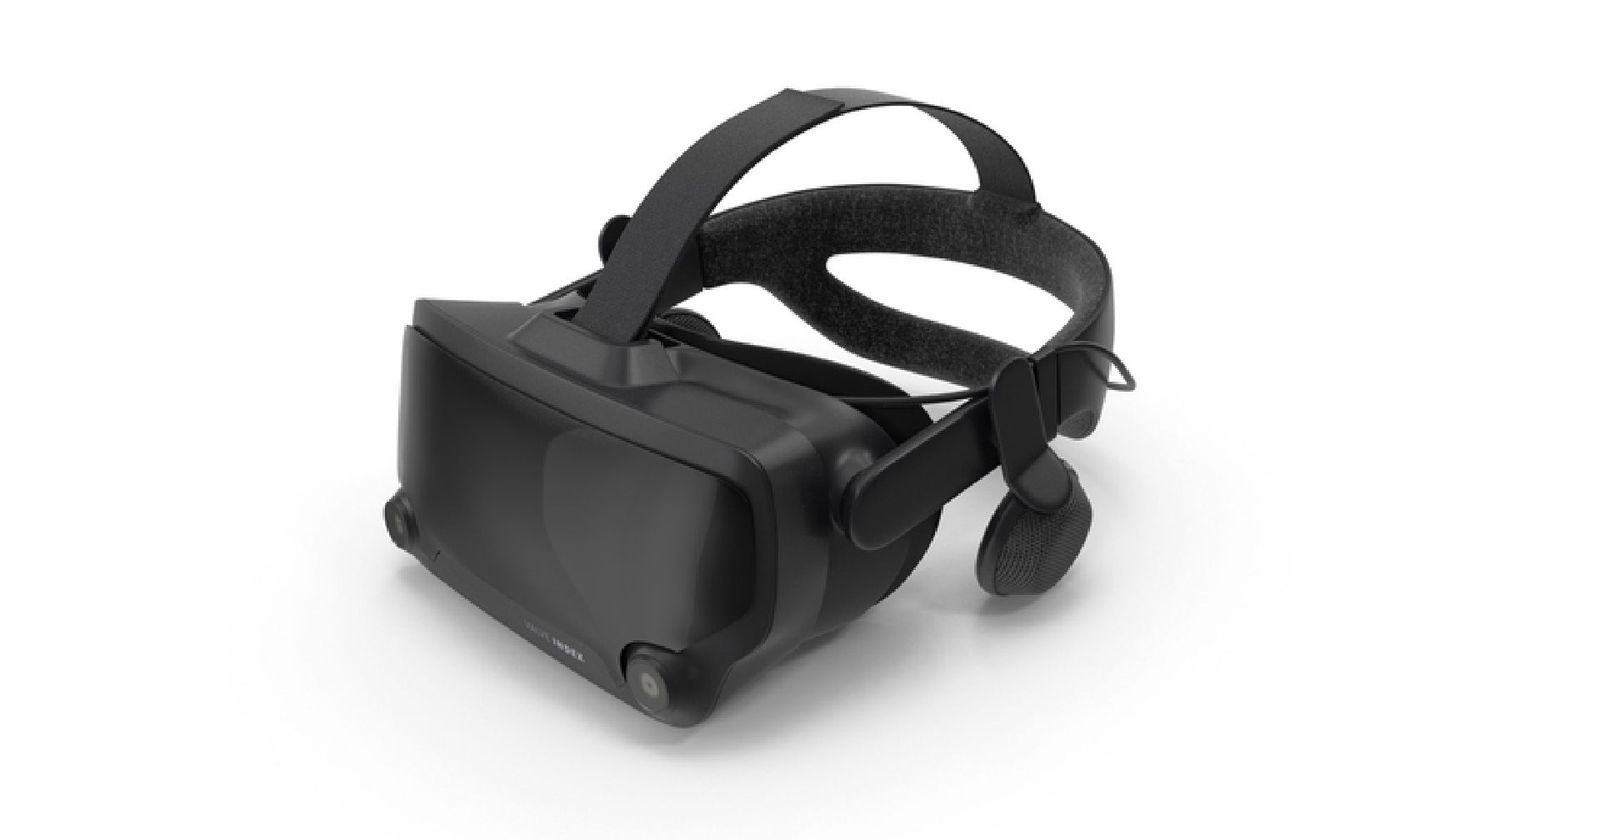 Valve Index is the most advanced virtual reality headset we've seen to date